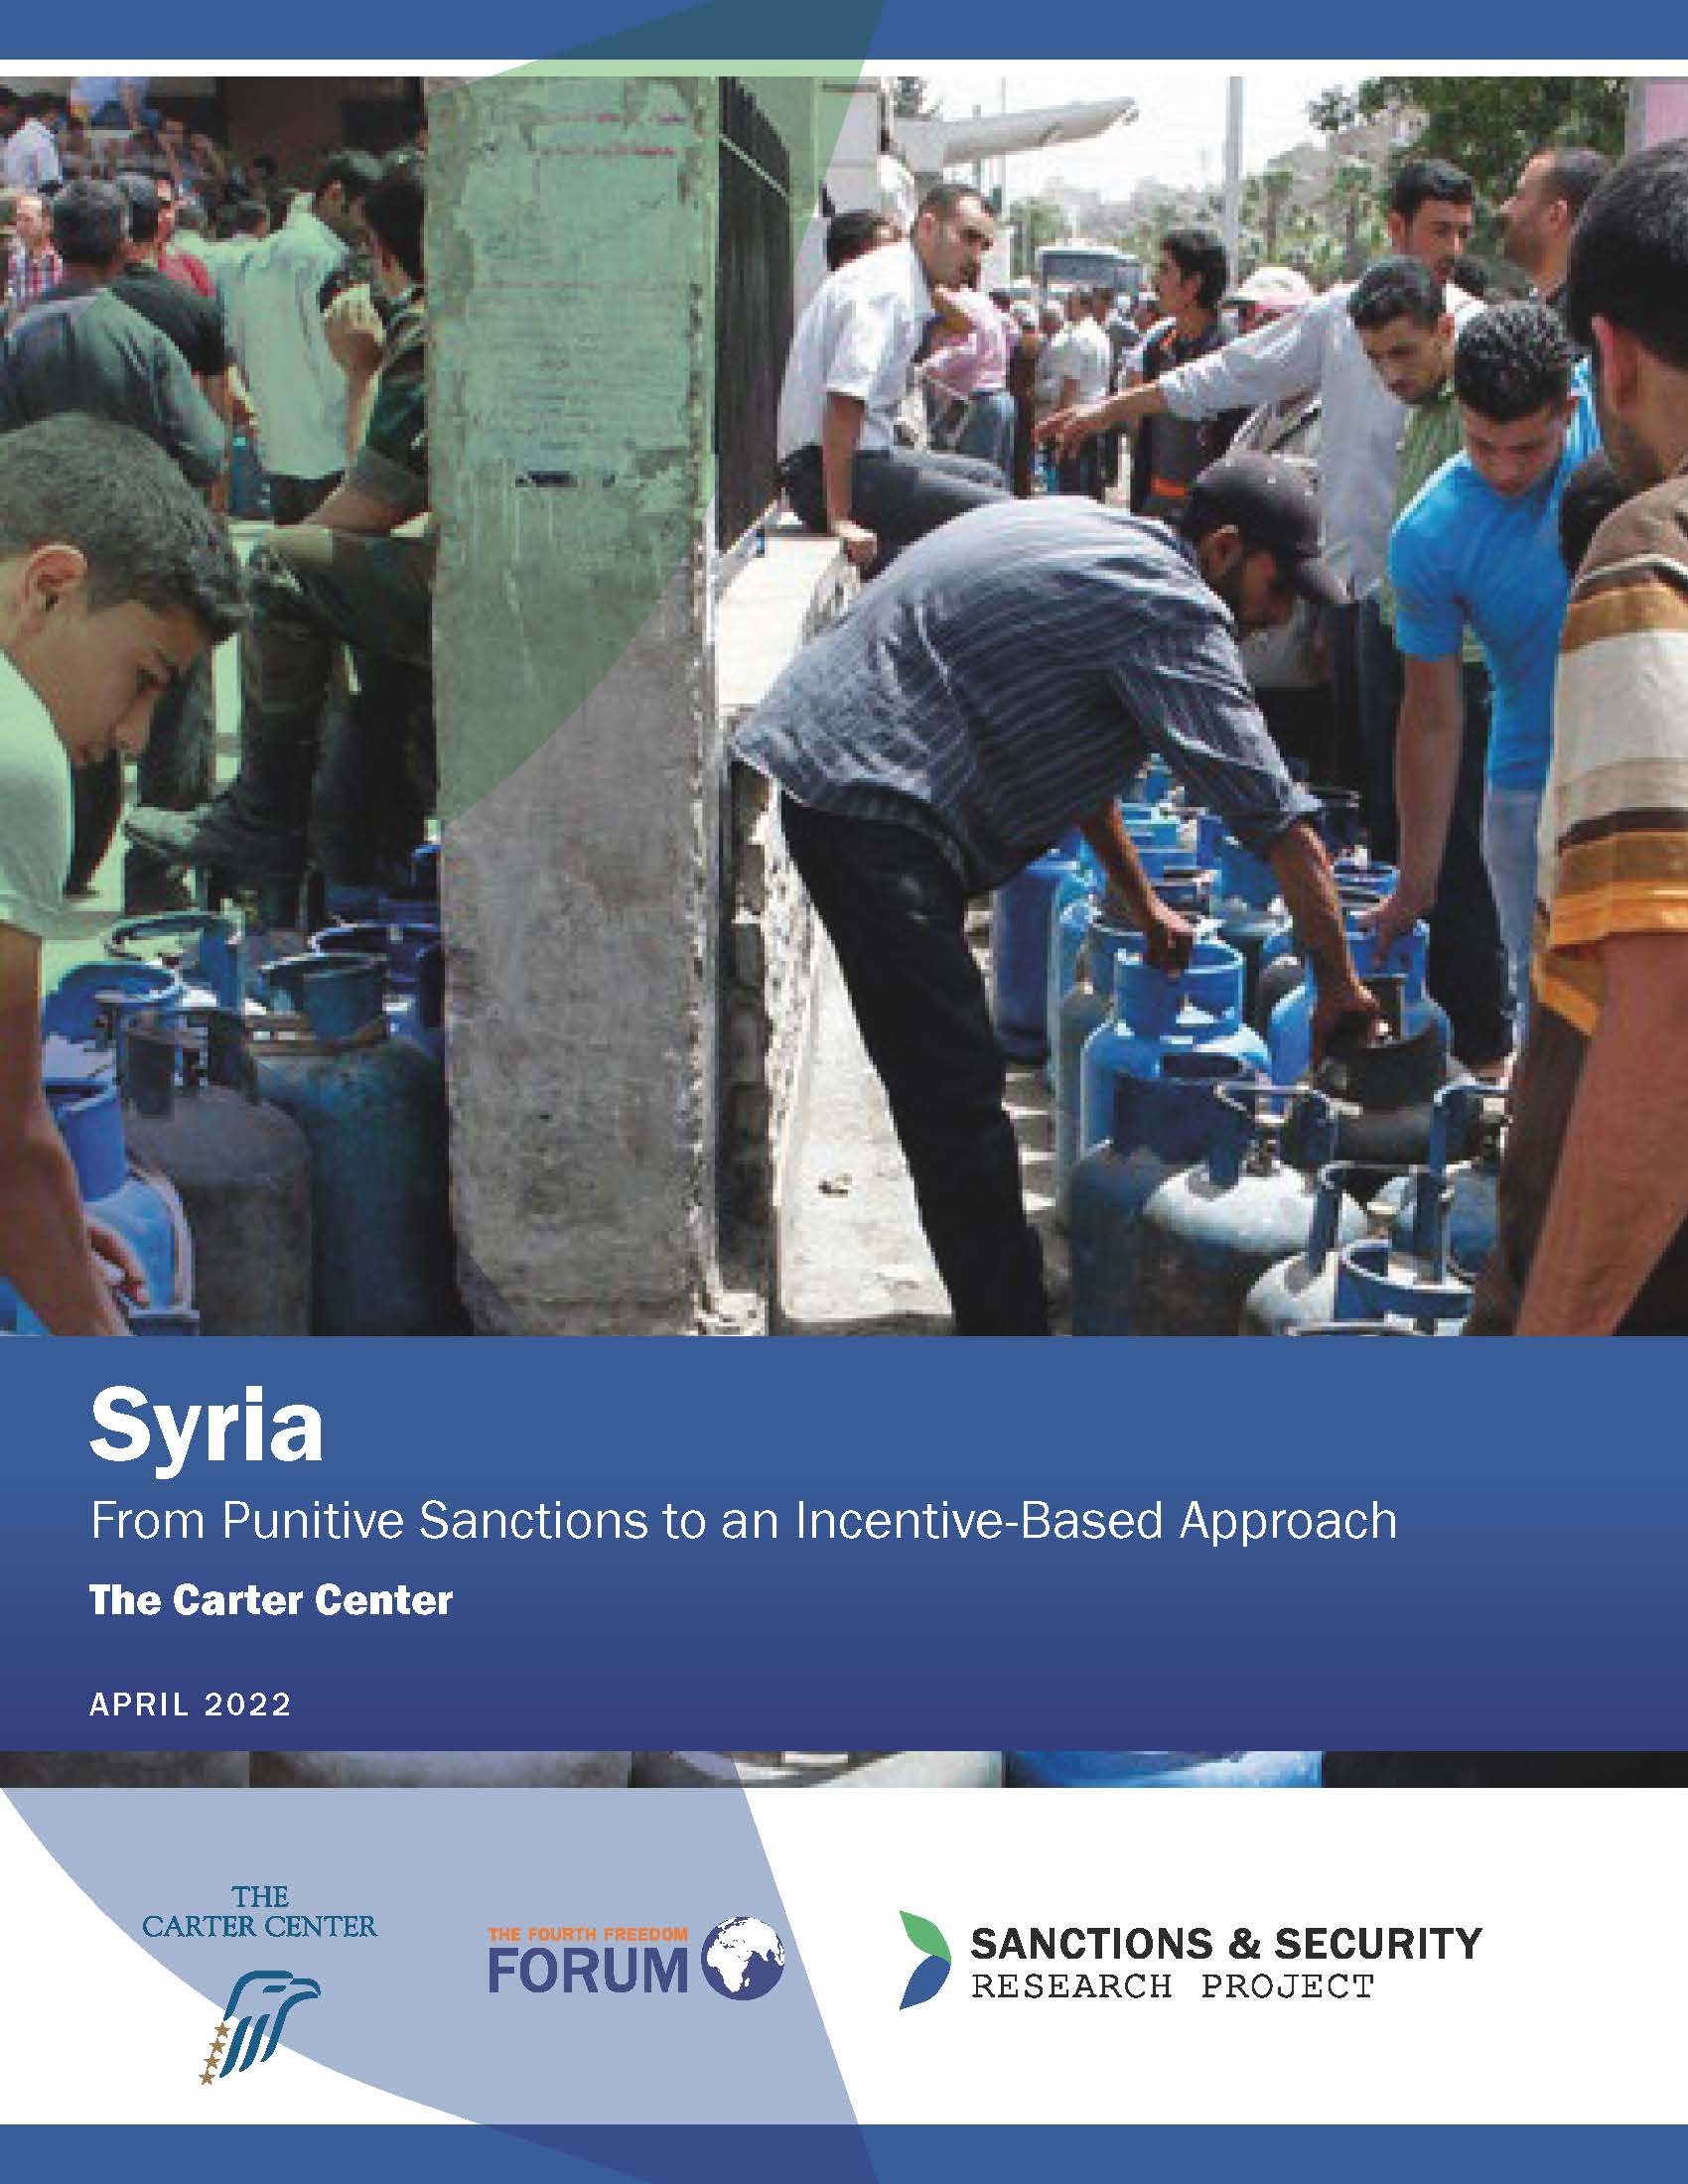 Syria: From Punitive Sanctions to an Incentive-Based Approach